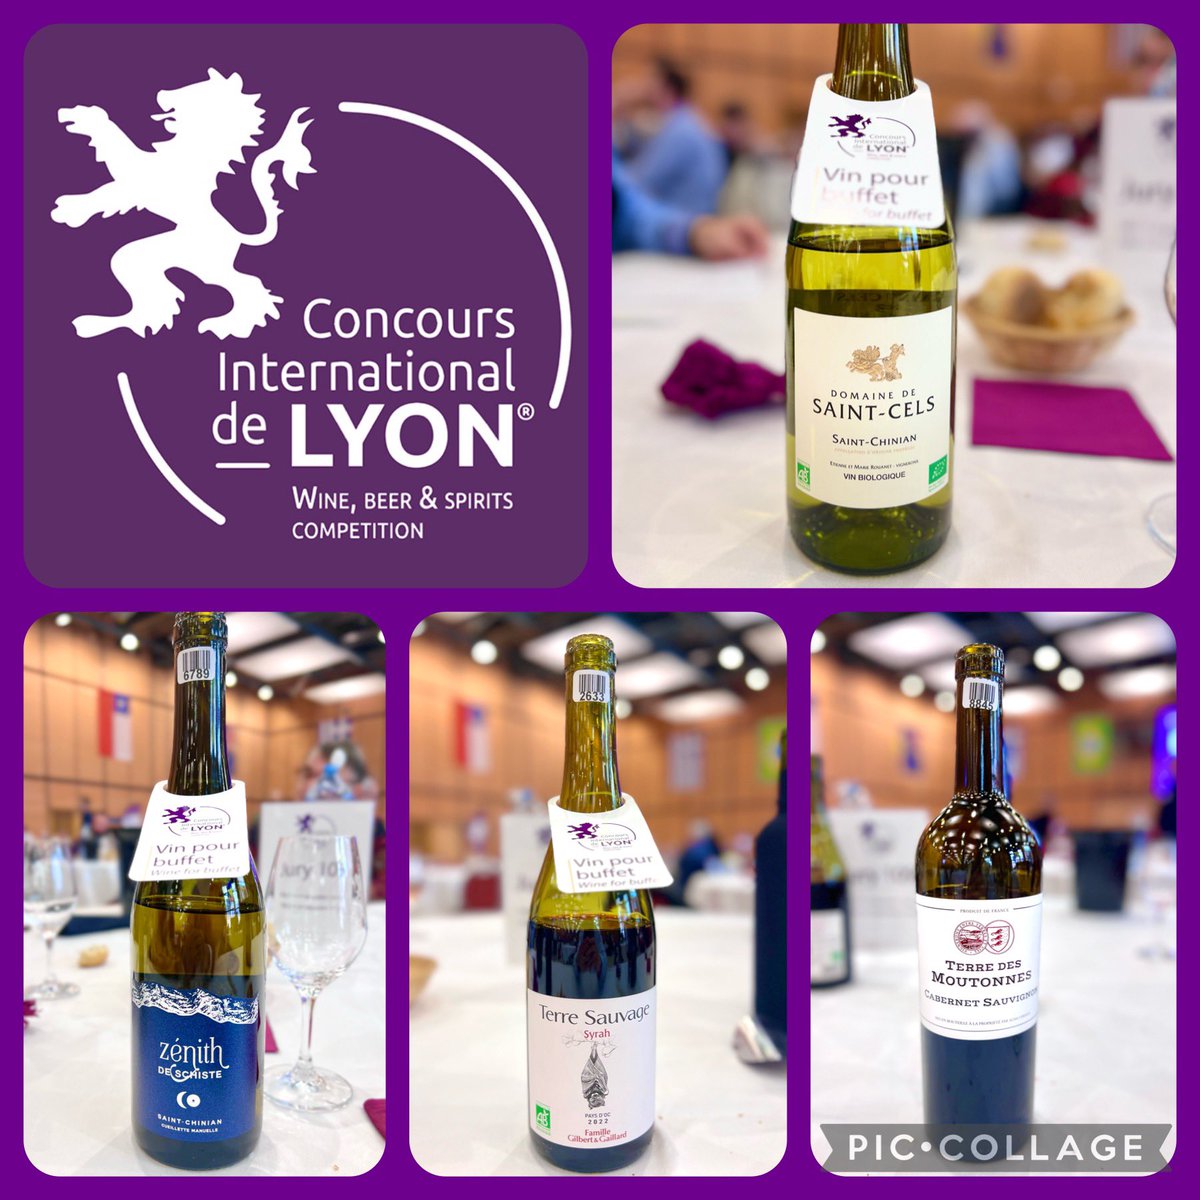 My panel had very similar high scores on these wines💮 Concours de Lyon 🍷 Looking forward to 2025 Concours de Lyon!

#concoursdelyon #concoursinternationaldelyon
#concourslyon #winecompetition #dipwset #wsetdiploma #circleofwinewriters #internationaldrinksspecialists